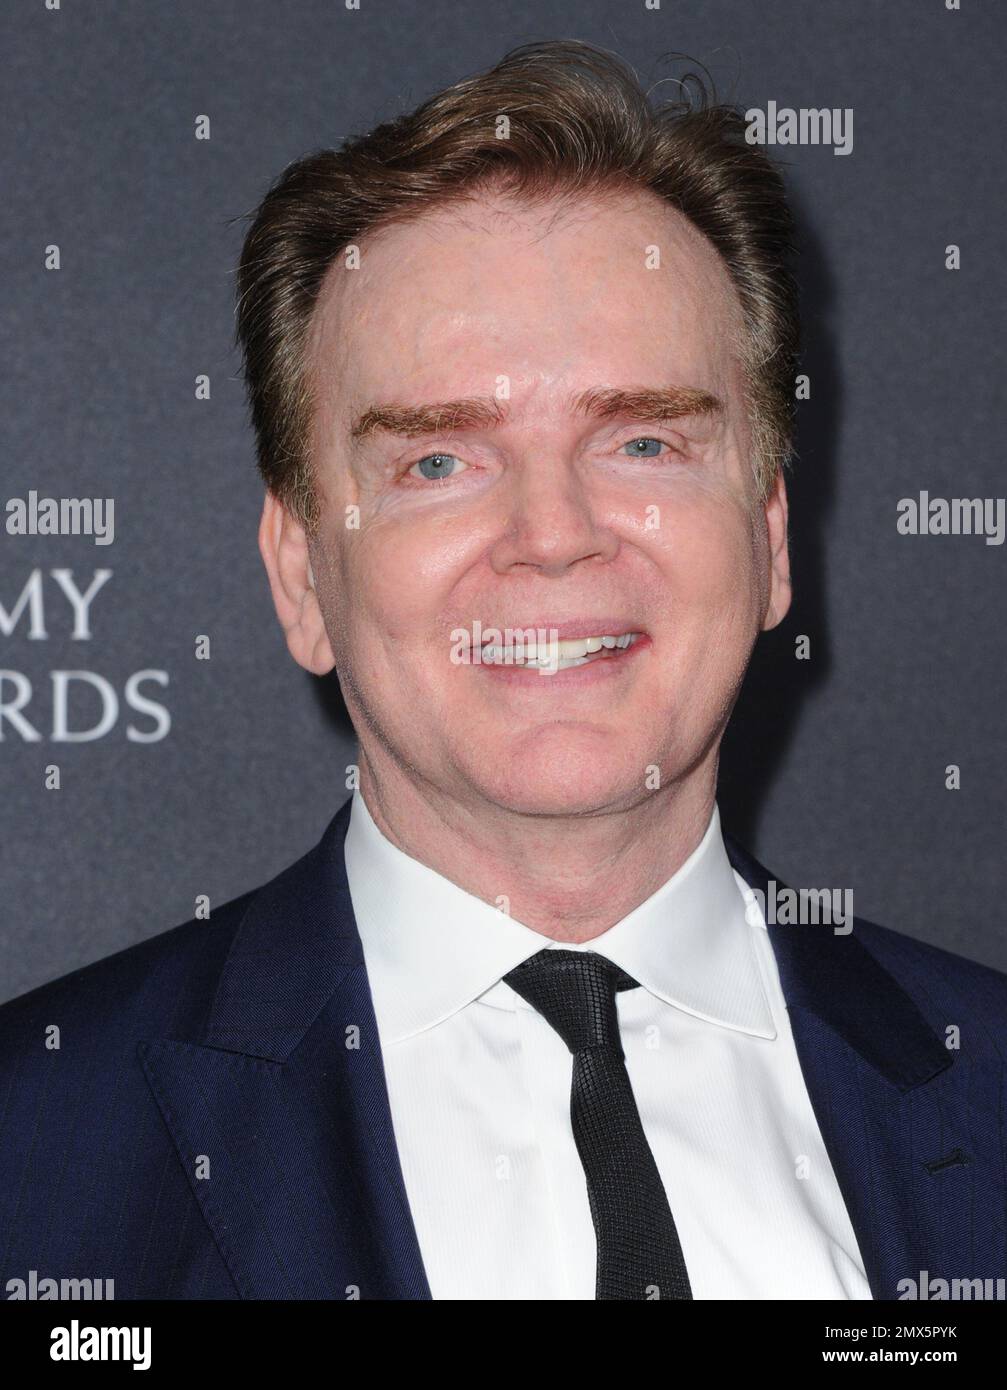 Christopher Guy arrives at the BAFTA Los Angeles Britannia Awards at the Beverly Hilton Hotel Friday, Oct. 28, 2016, in Beverly Hills, Calif. (Photo by Richard Shotwell/Invision/AP) Stock Photo